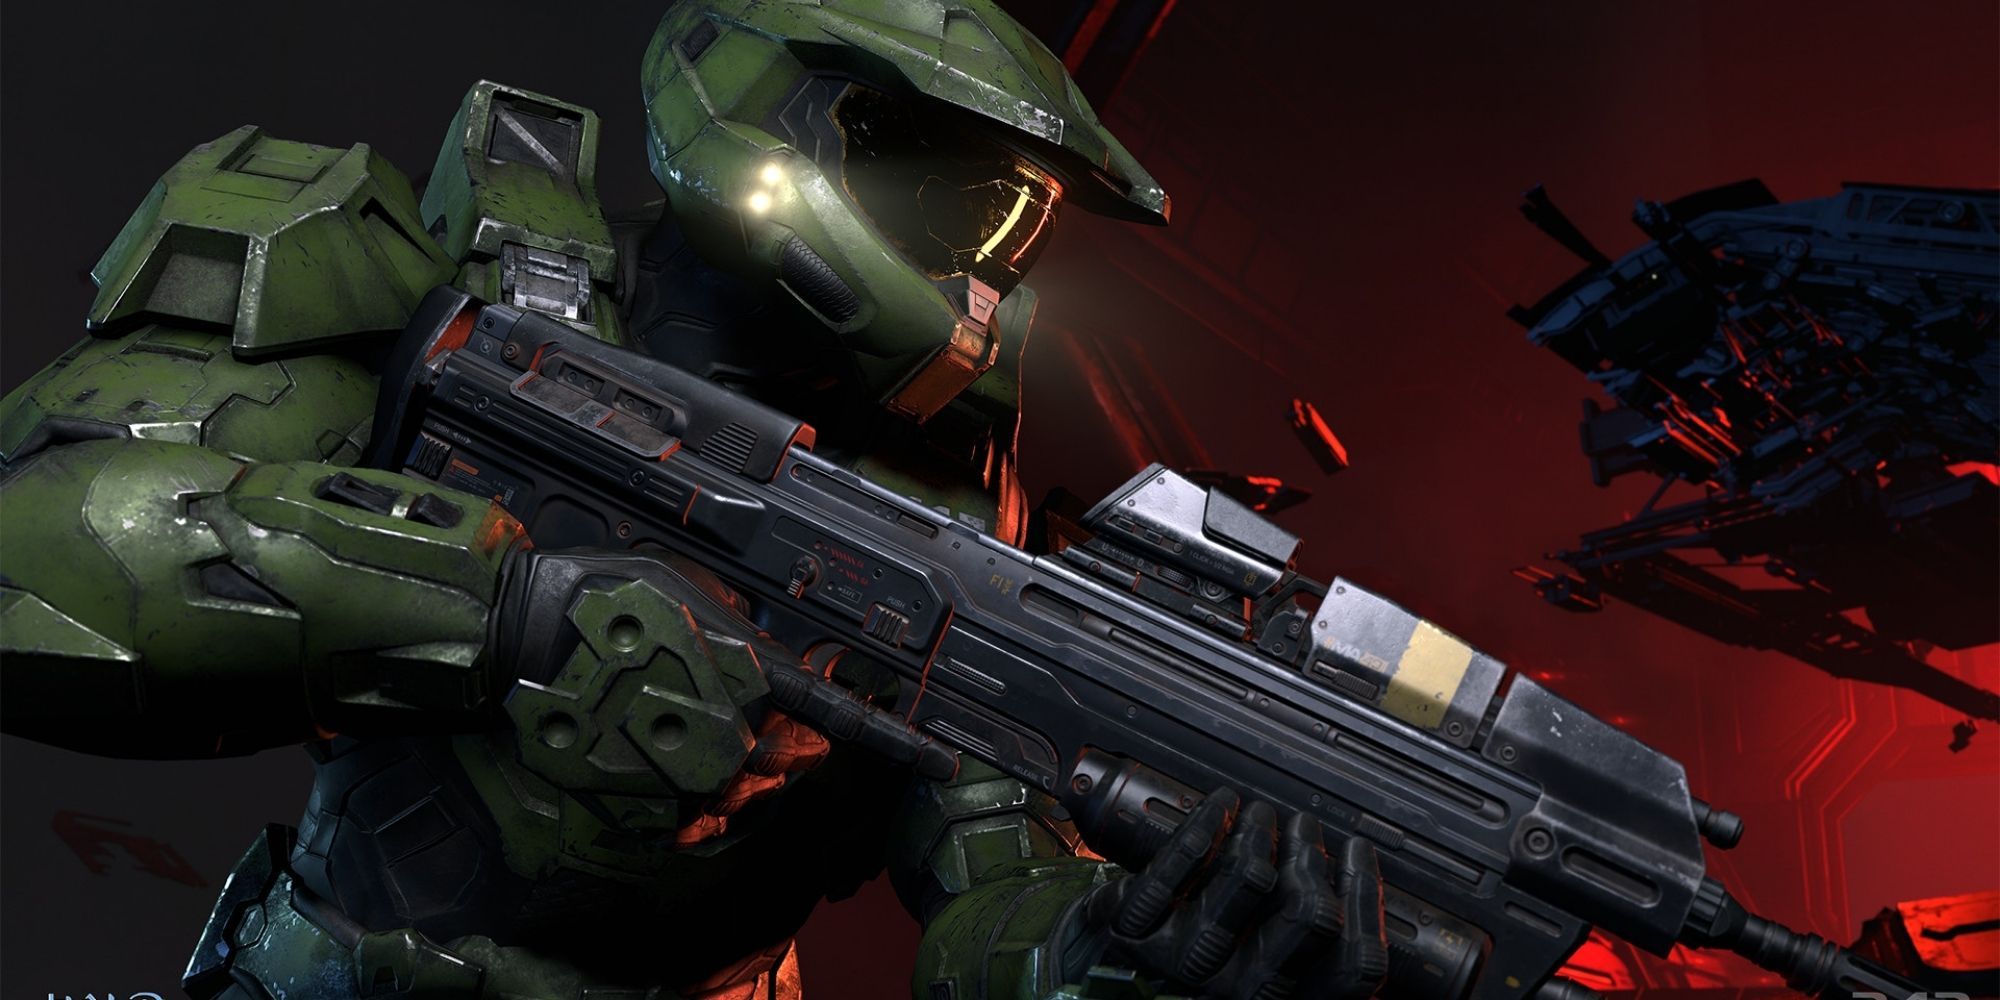 Official image of Halo character Master Chief holding an Assault Rifle.